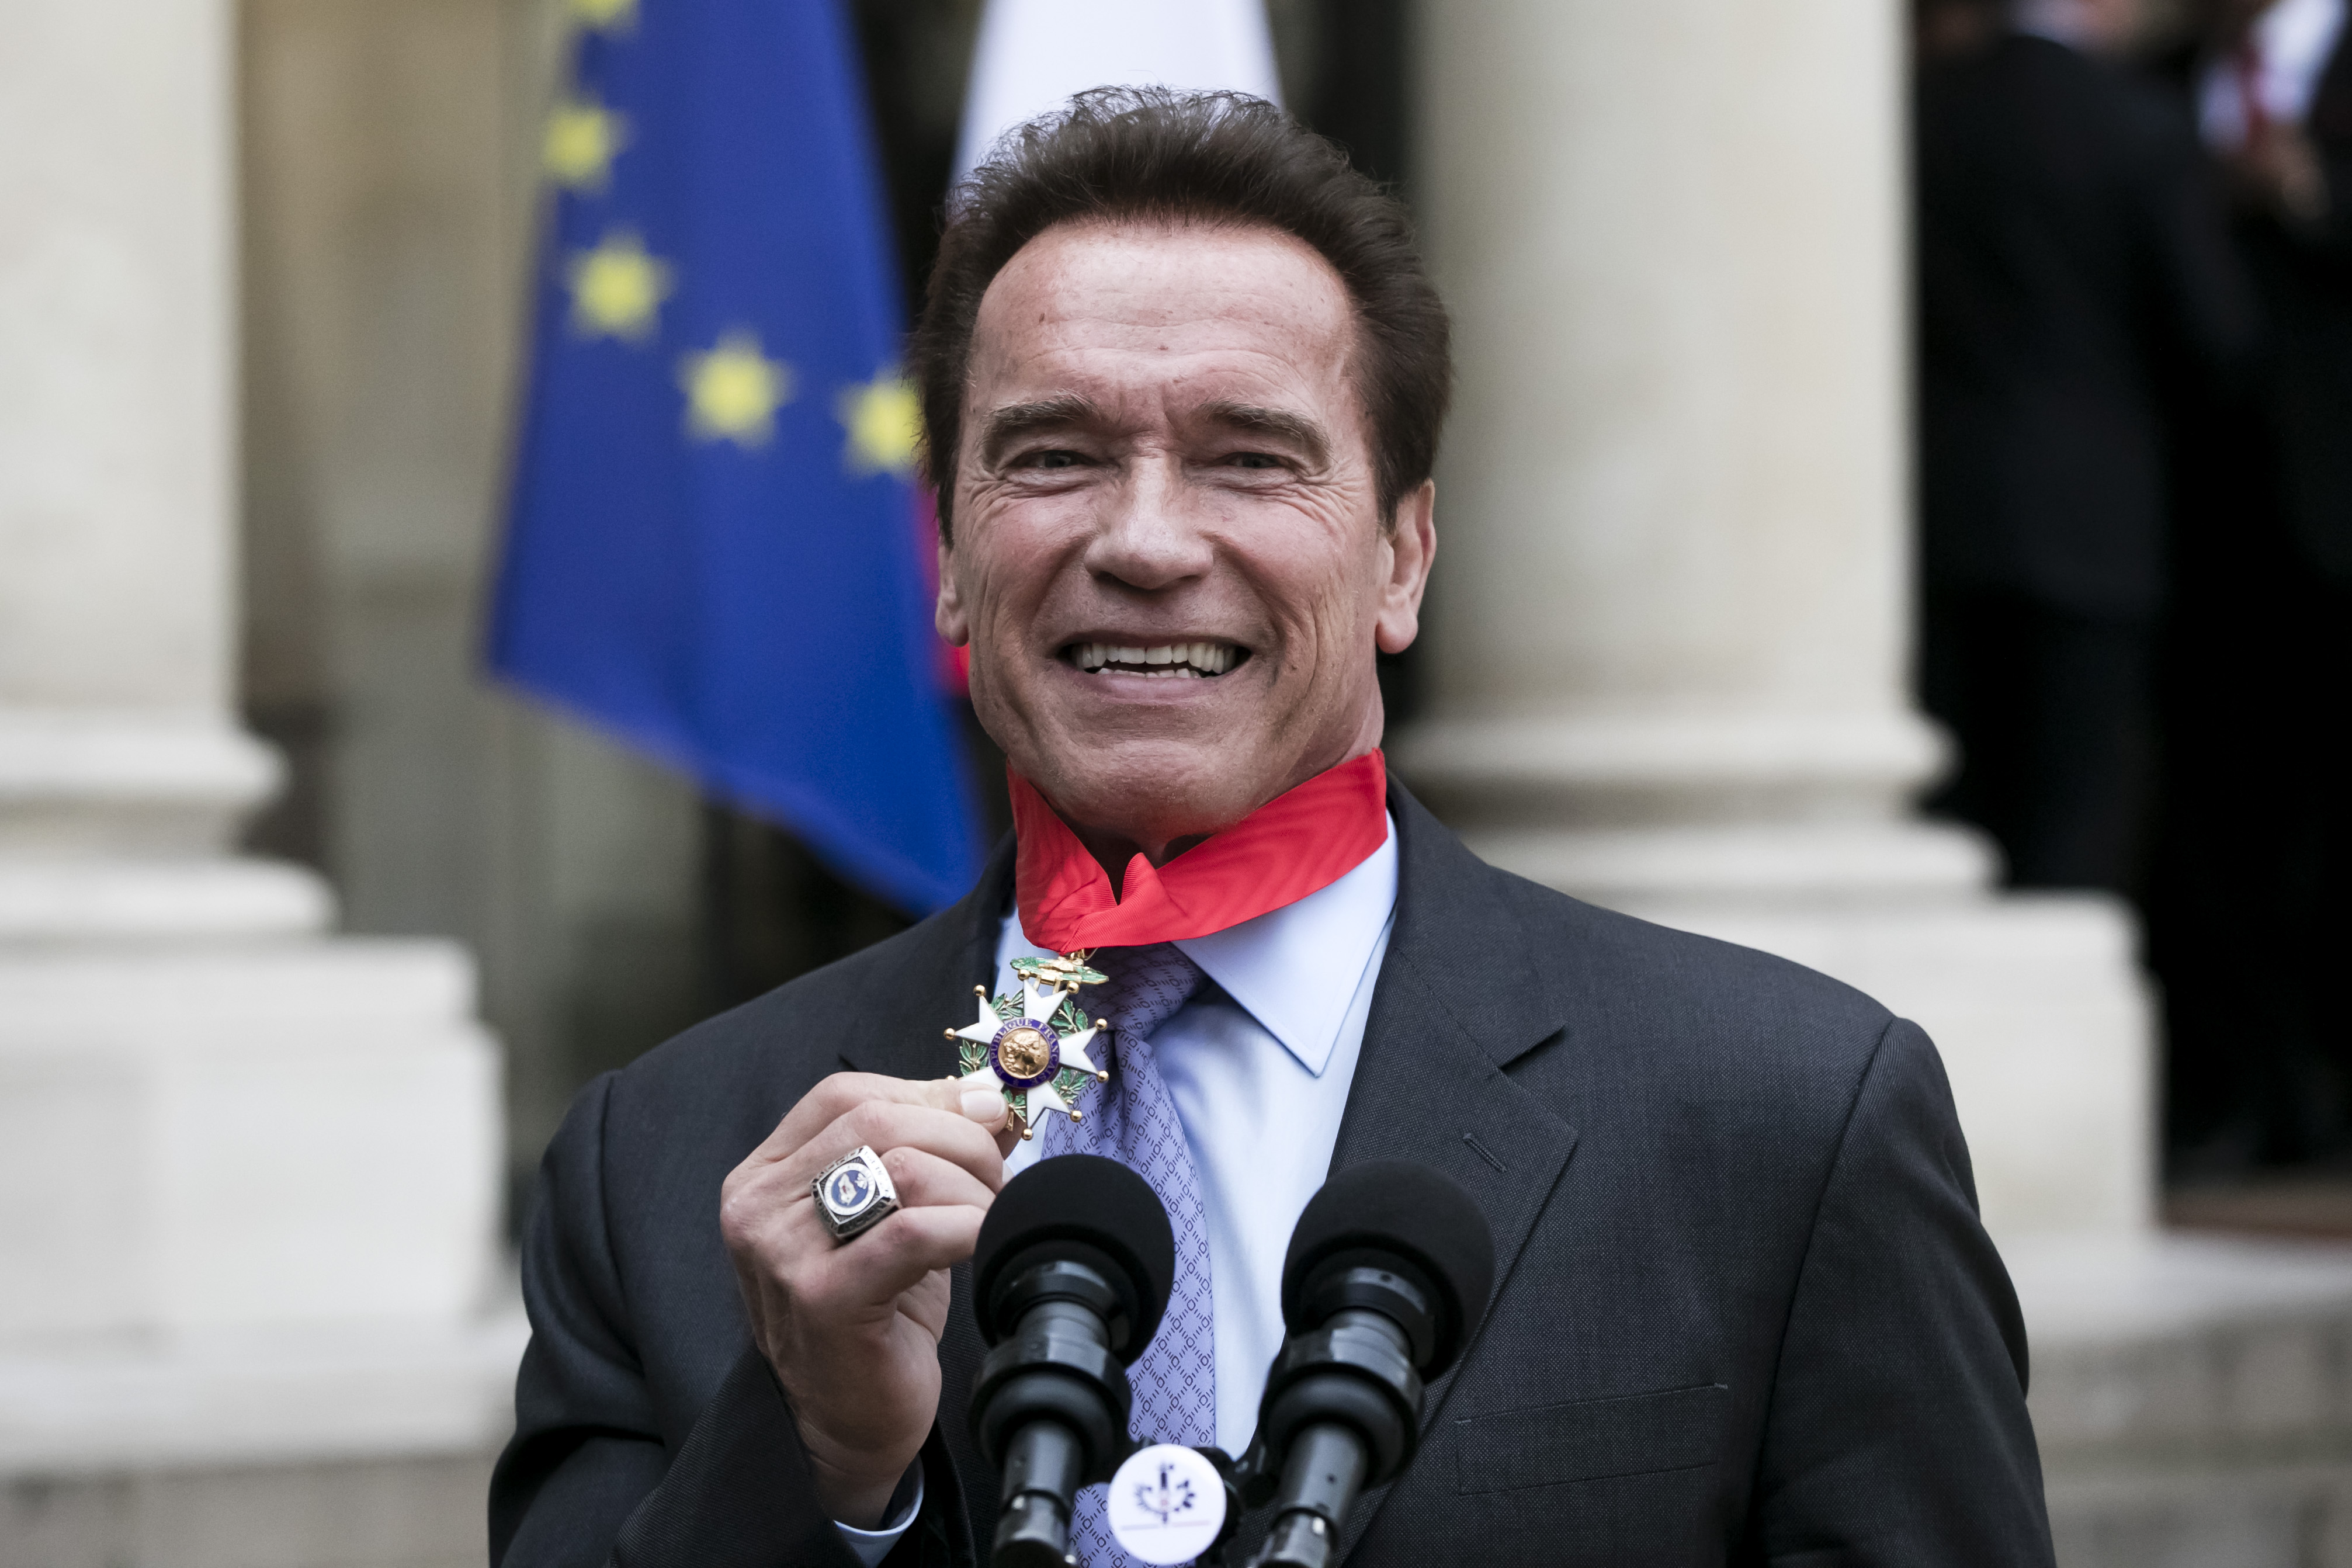 Arnold Schwarzenegger at the Elysee Palace in Paris on April 28, 2017 | Source: Getty Images